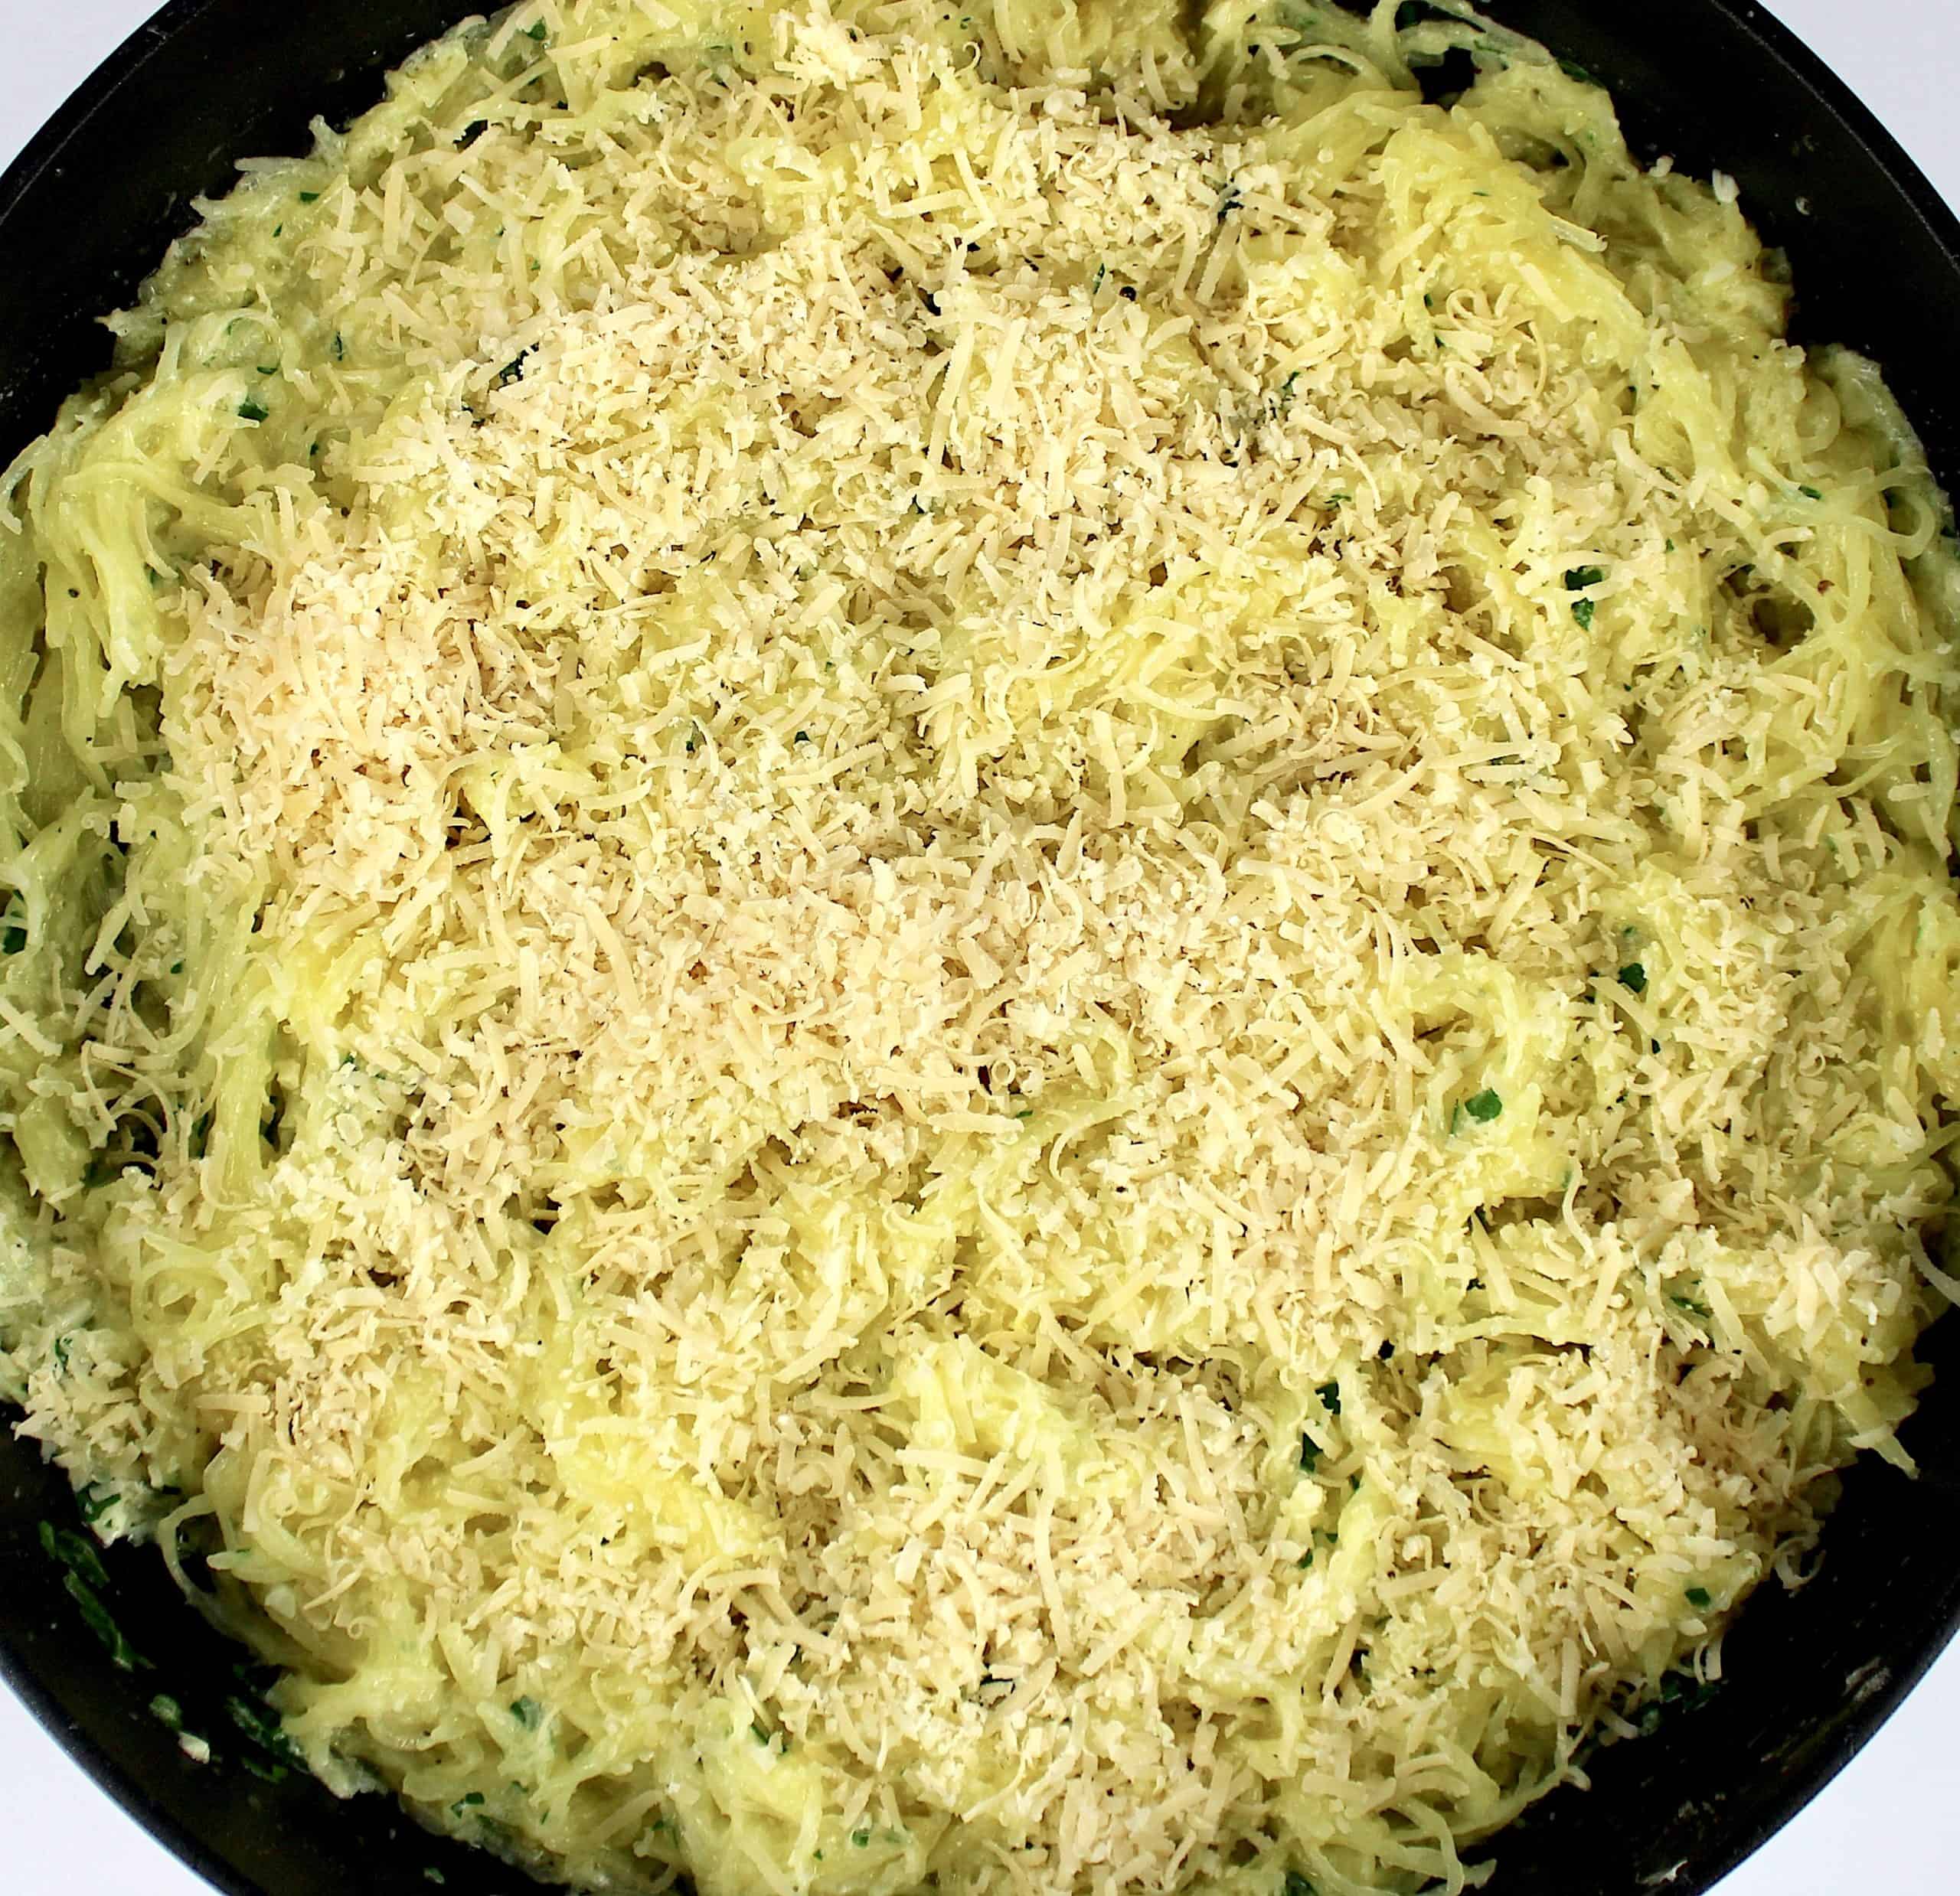 Parmesan Garlic Spaghetti Squash with grated cheese on top